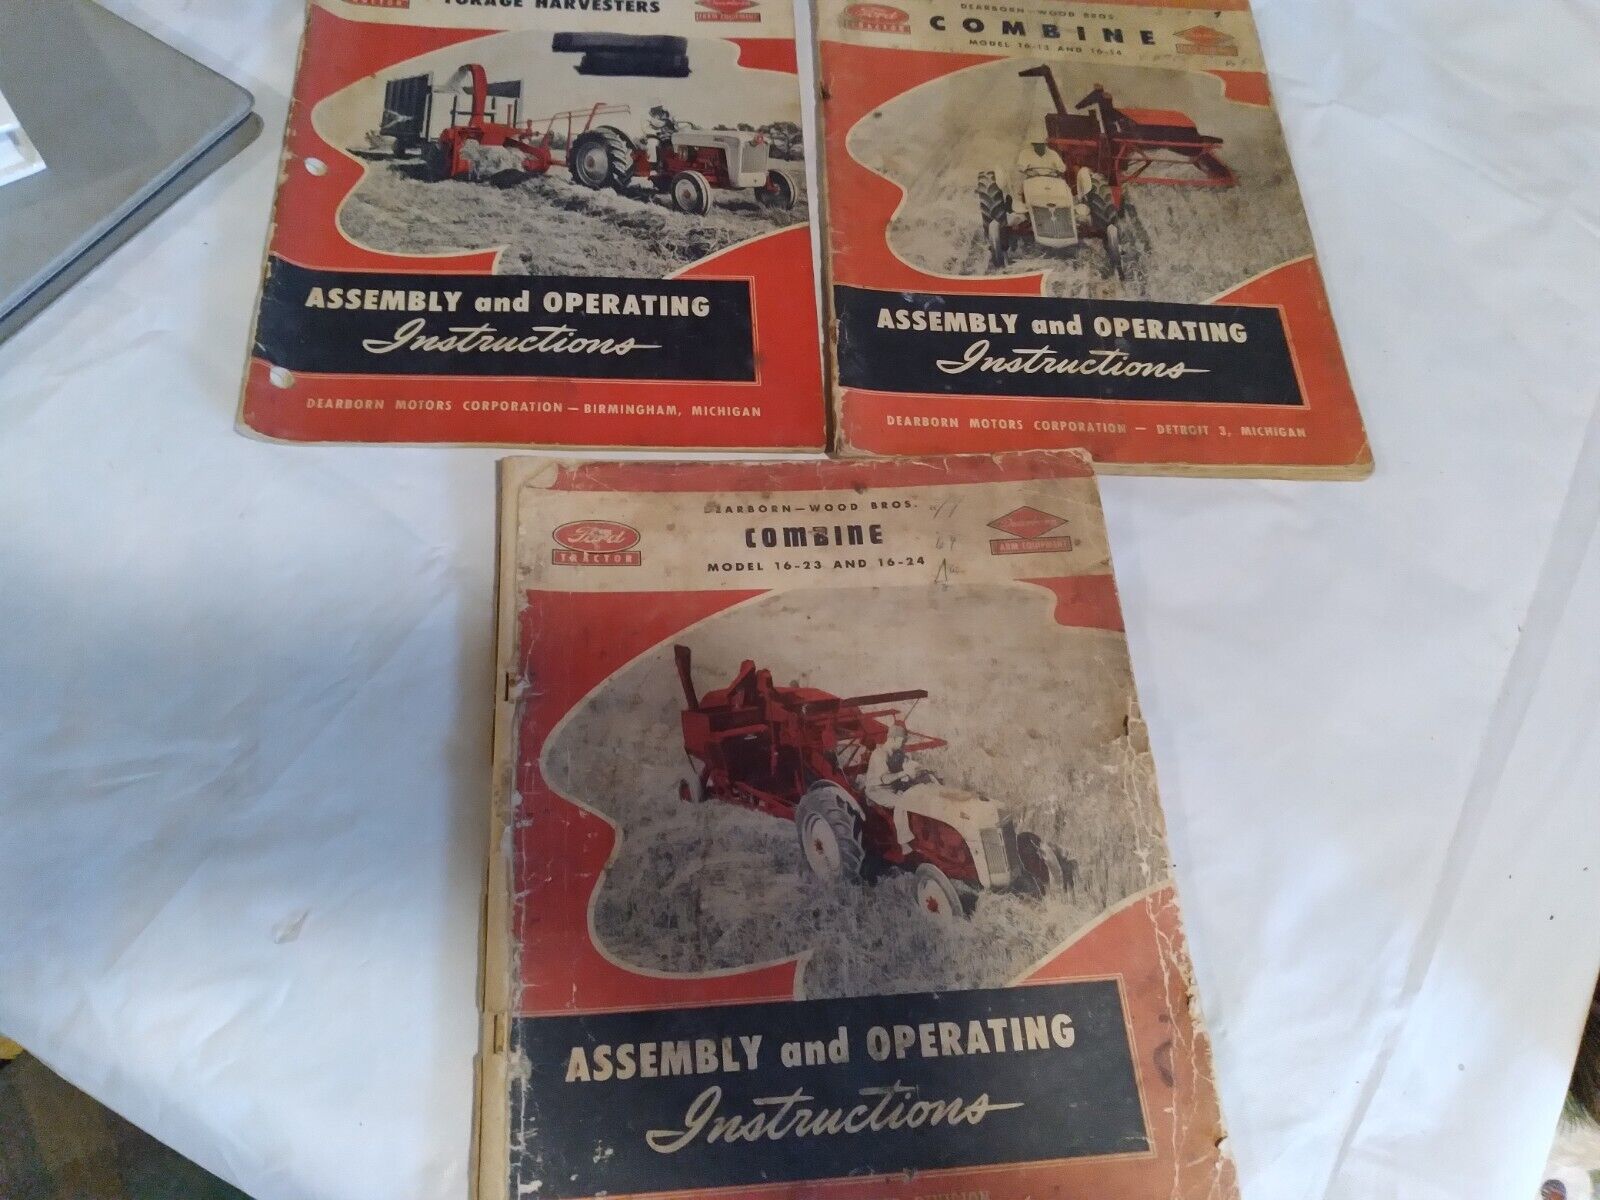 3 vintage FORD tractor company manuals